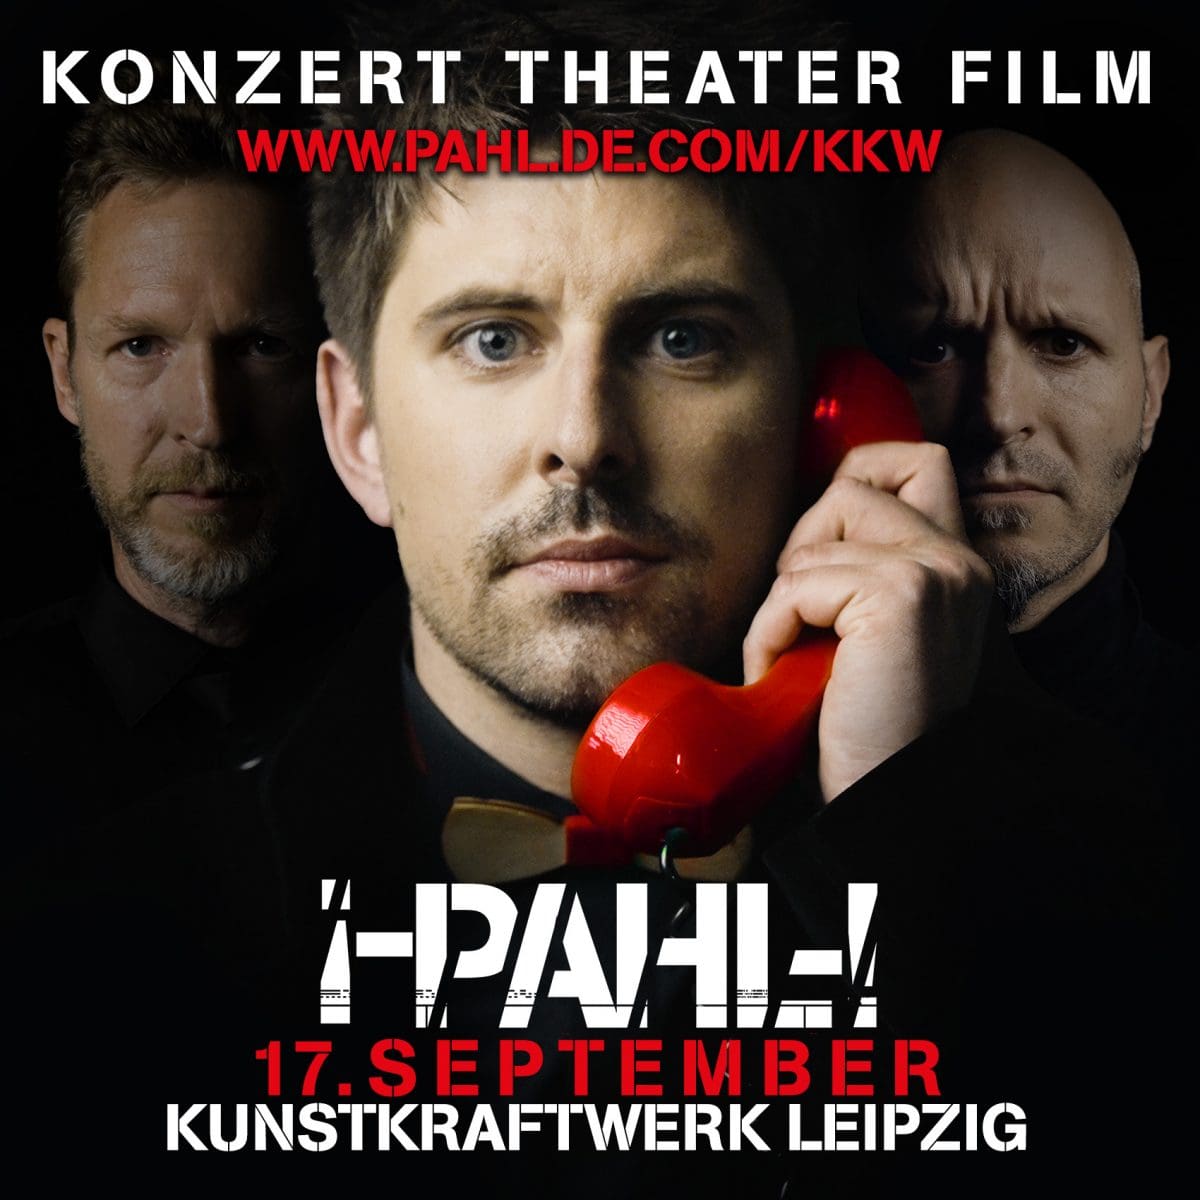 ¡-PAHL-! launches new video 'Smash the Hope' and performs live at Kunstkraftwerk